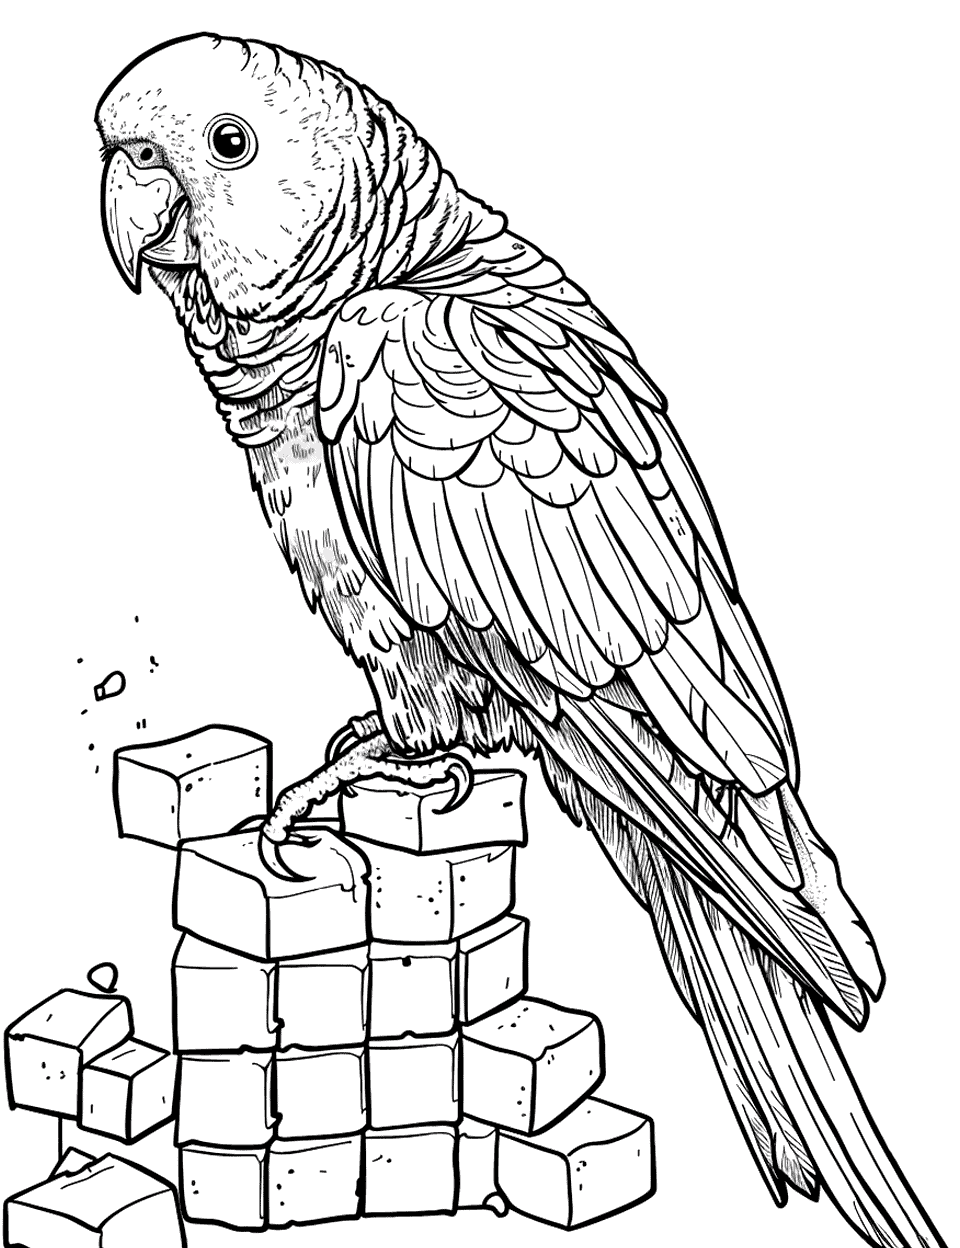 African Grey Solving a Simple Block Puzzle Parrot Coloring Page - An African grey rearranging blocks, engaging in a basic puzzle.